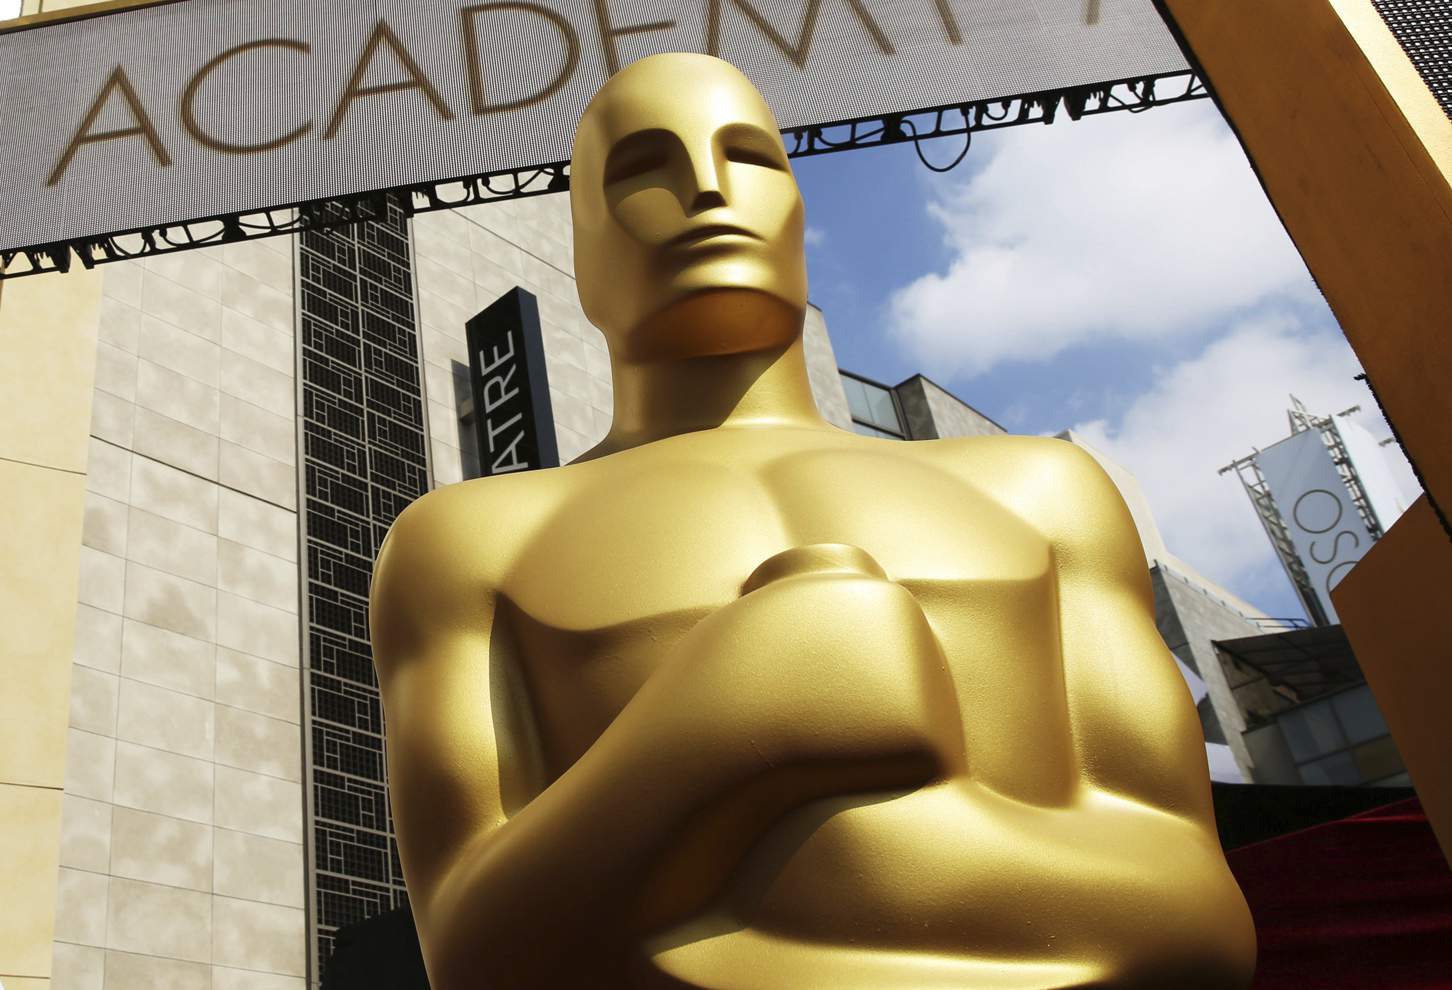 Oscars will be broadcast from multiple locations